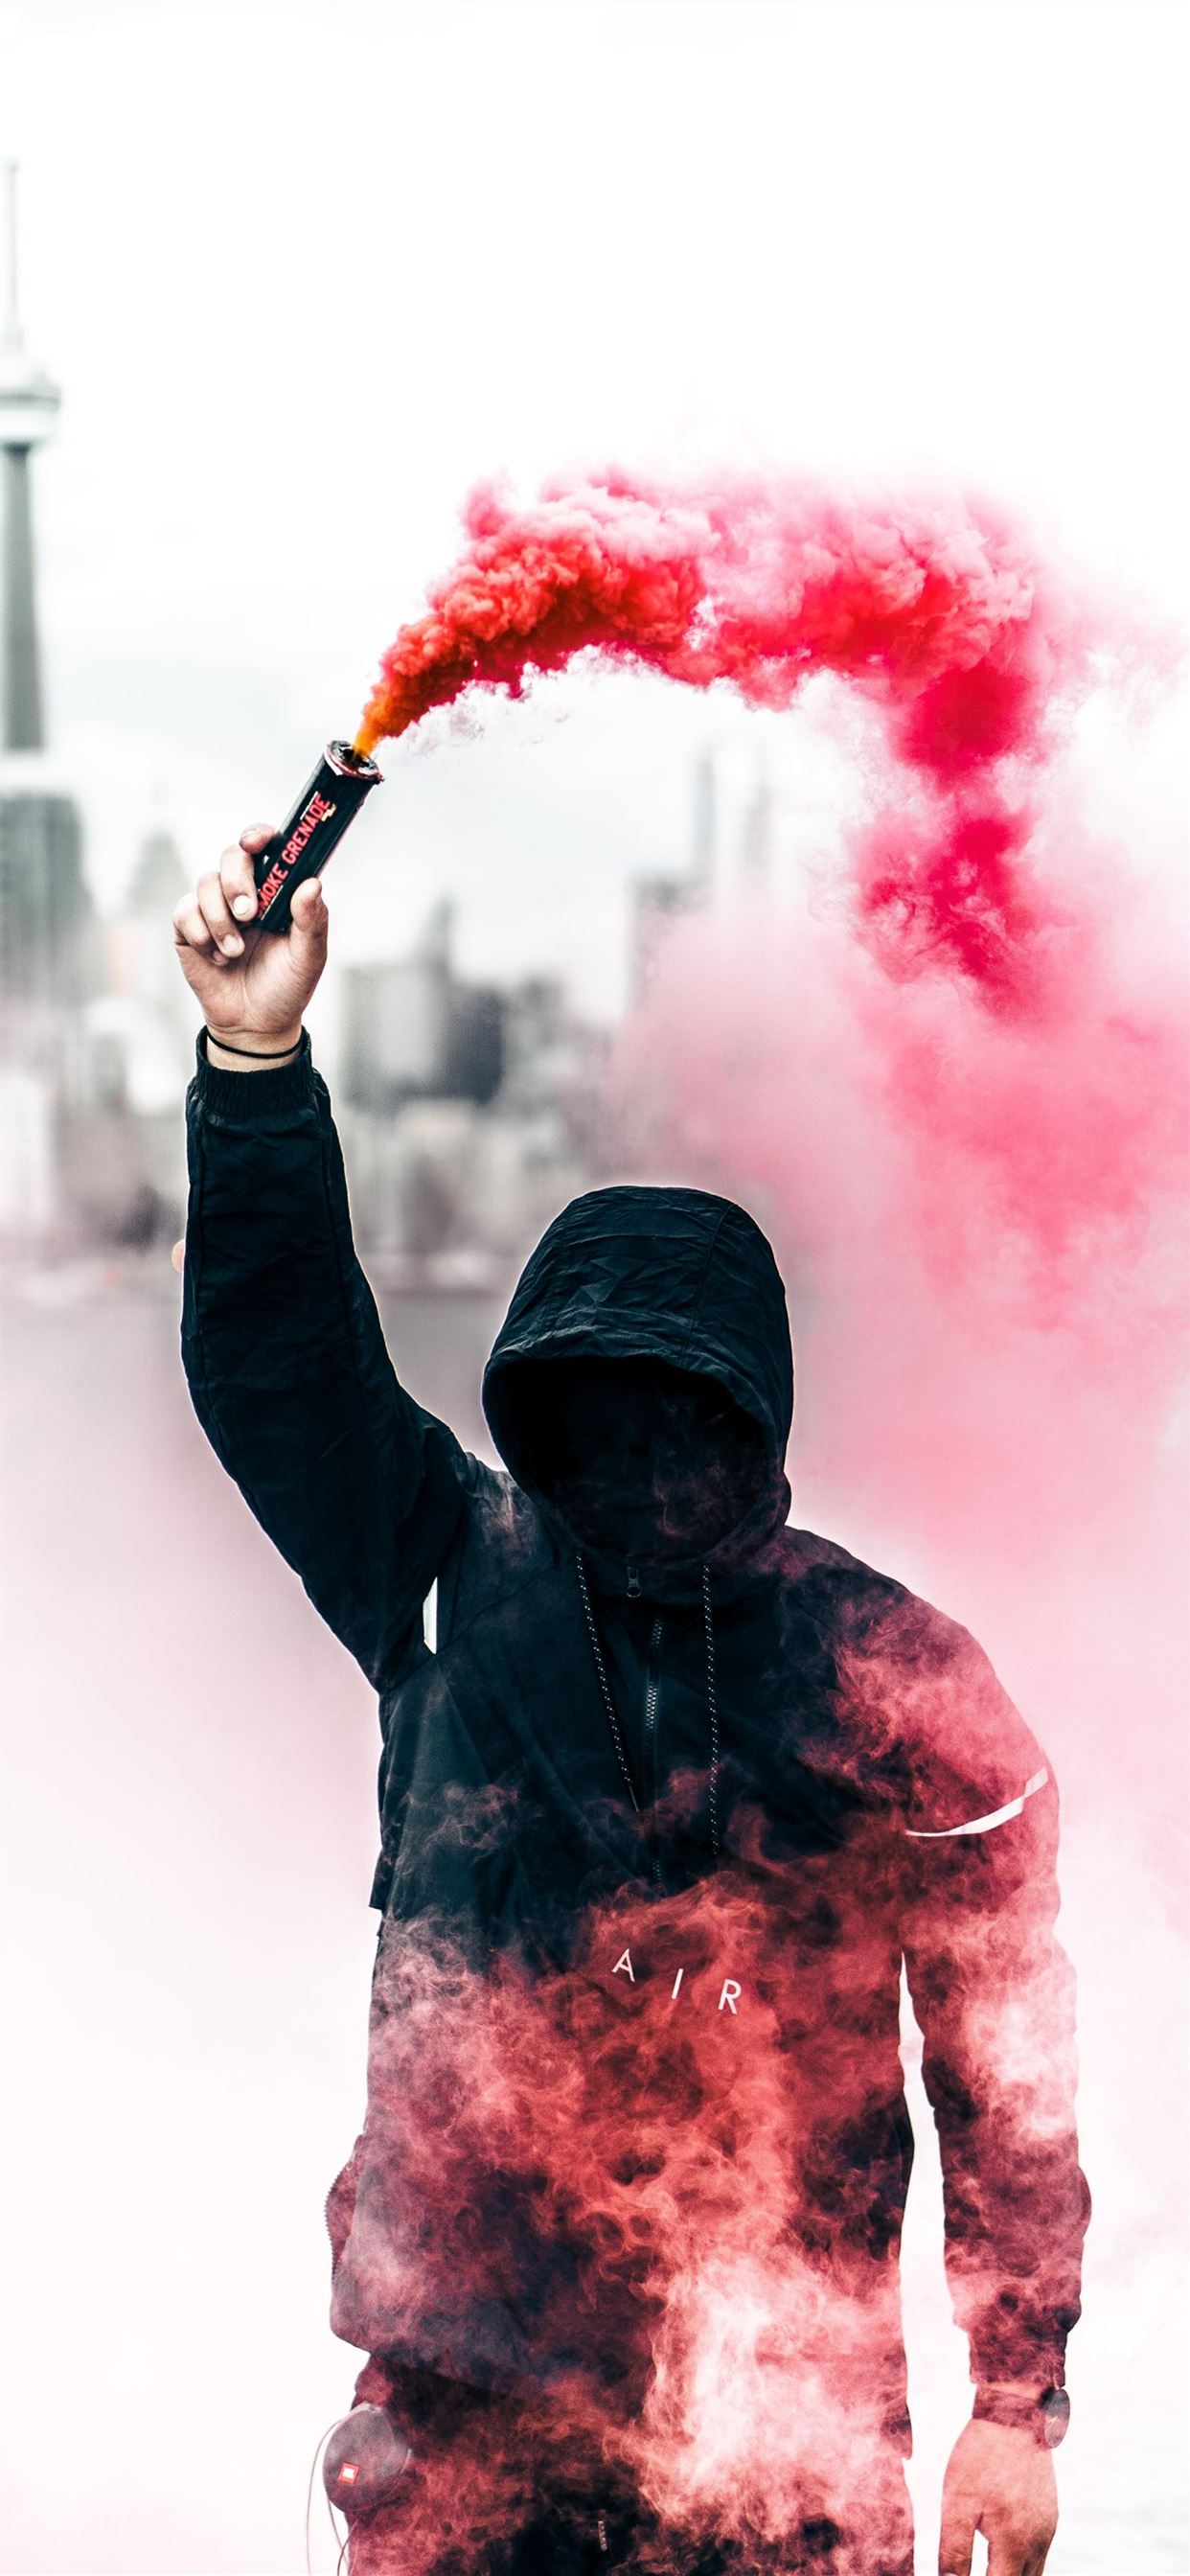 person wearing black and red hoodie holding smoke. iPhone 11 Wallpaper Free Download